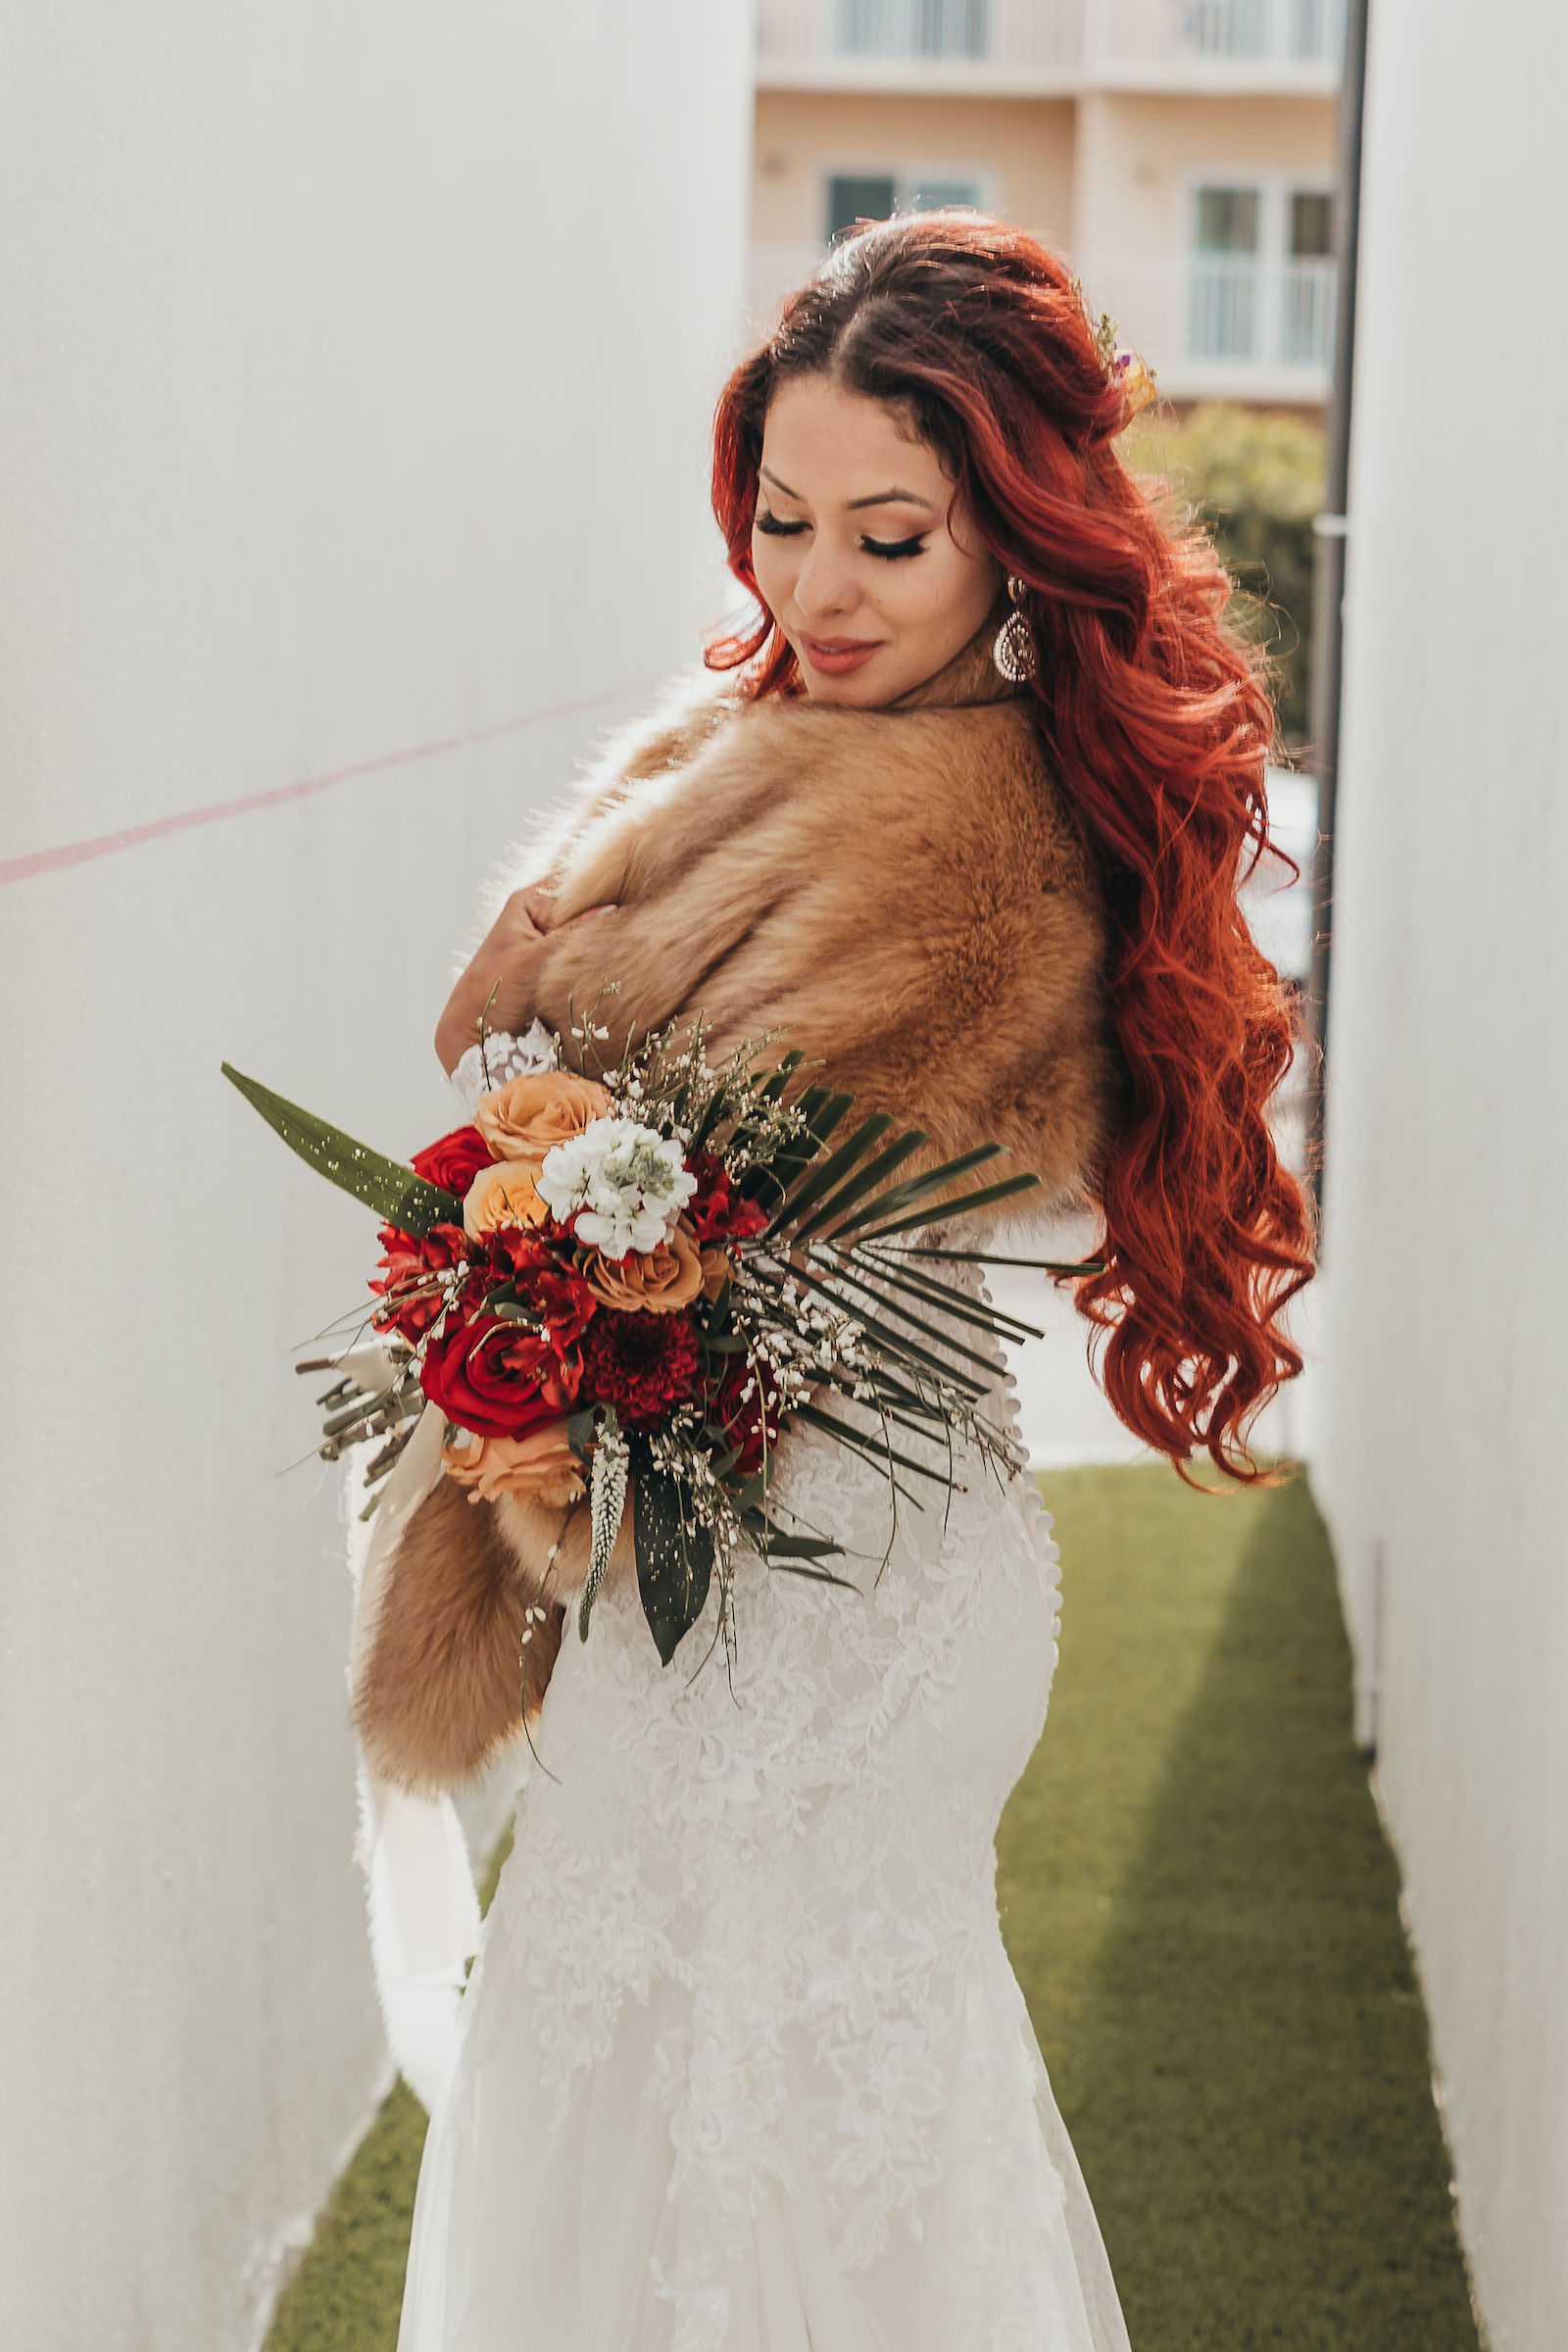 Lace Long Sleeve Trumpet Style Wedding Dress with Fur Shawl Bridal Portrait | Tampa Florida Bridal Boutique Truly Forever Bridal